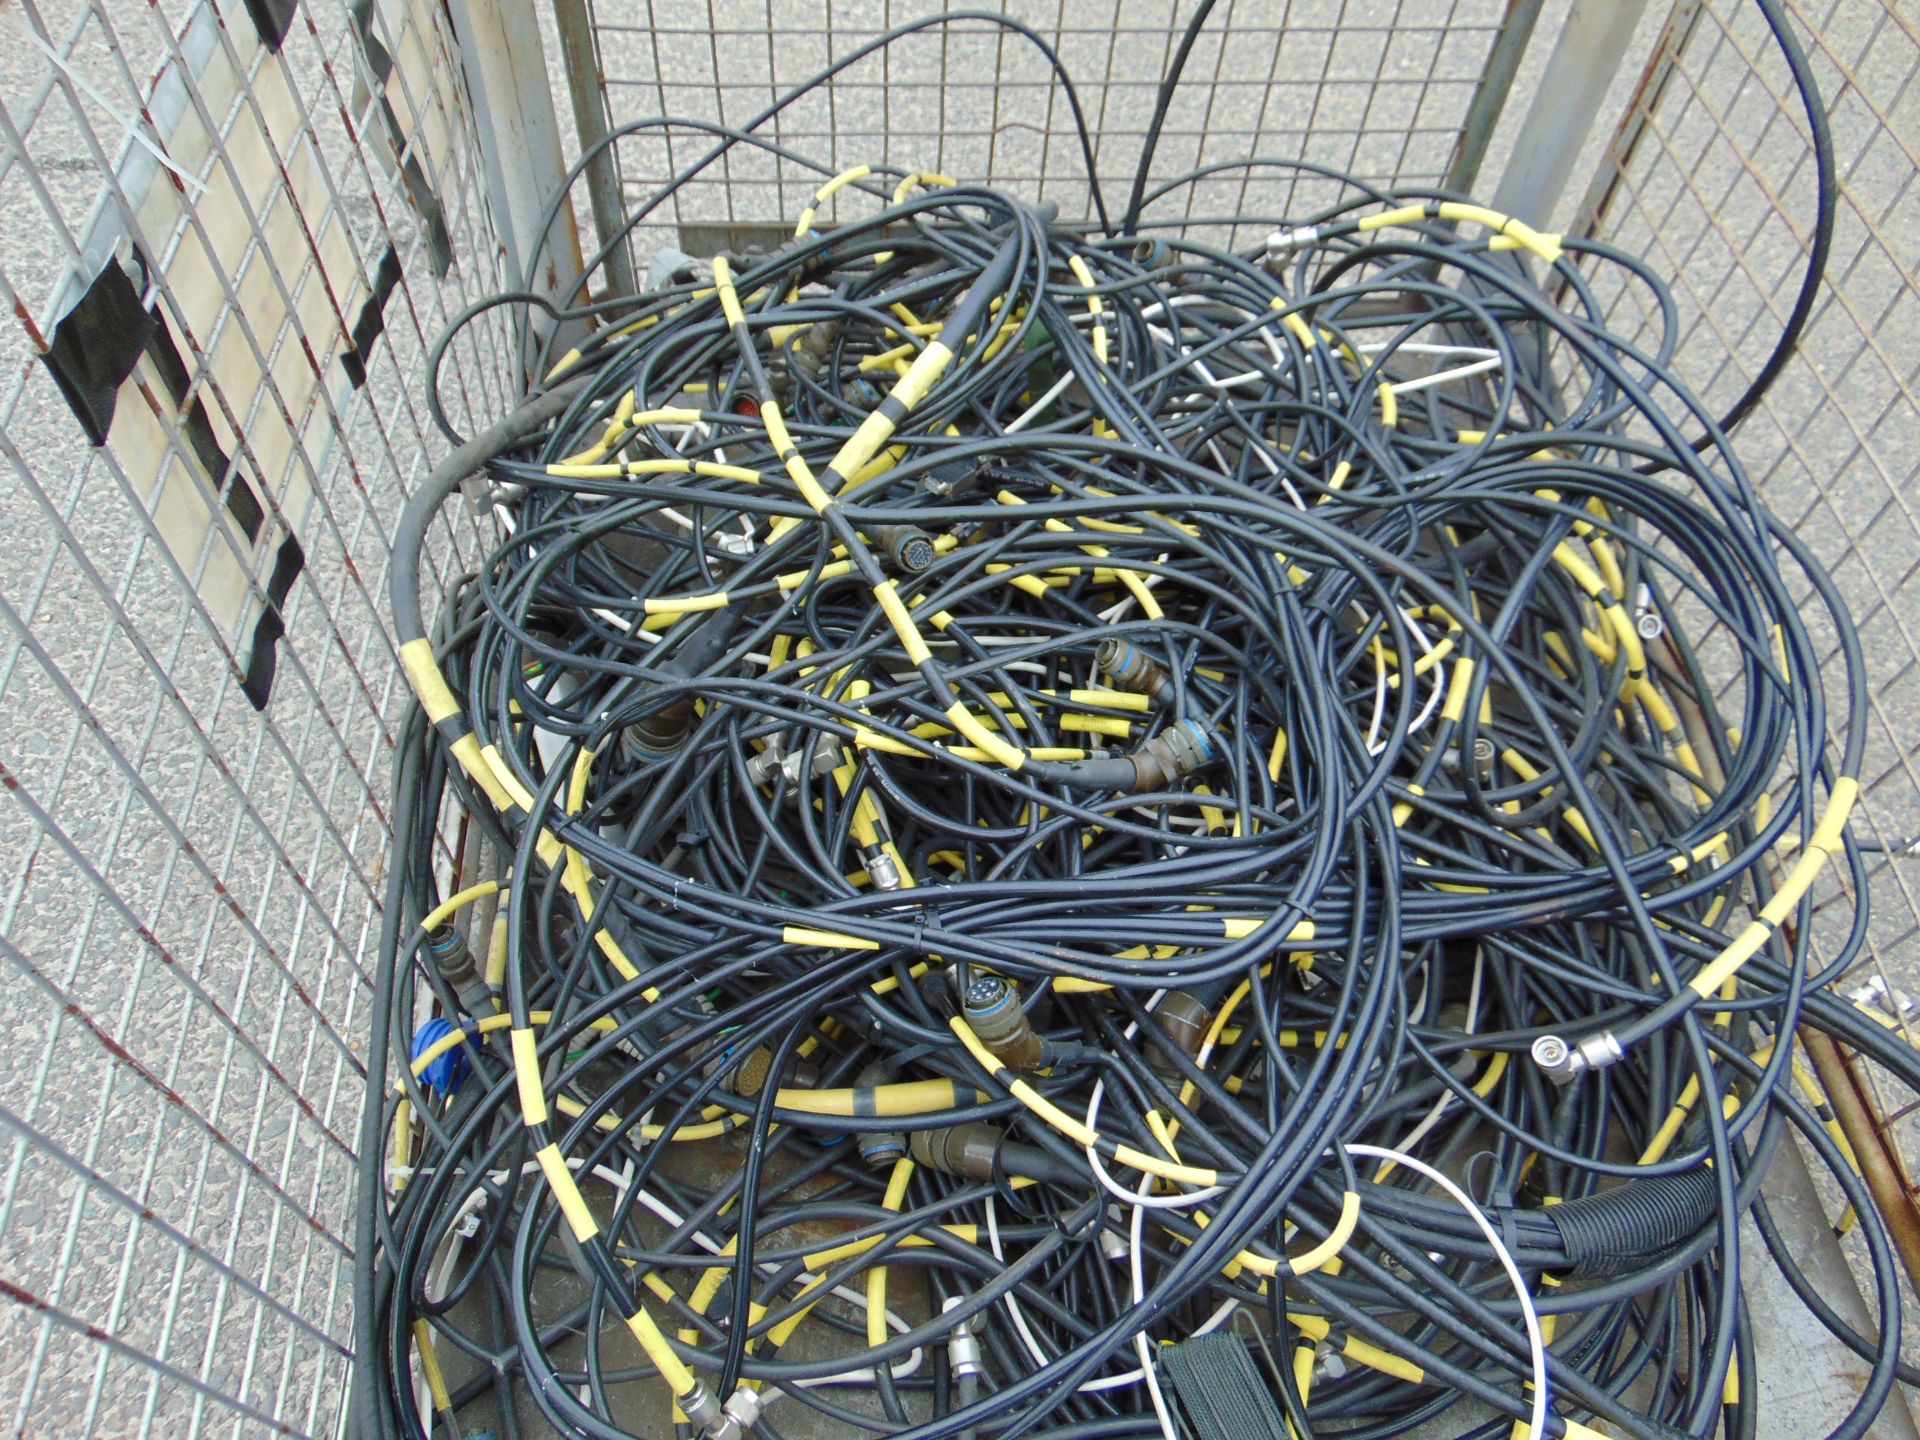 1x Stillage of Radio Cables inc Coax, Power, Radio Connections etc - Image 2 of 4